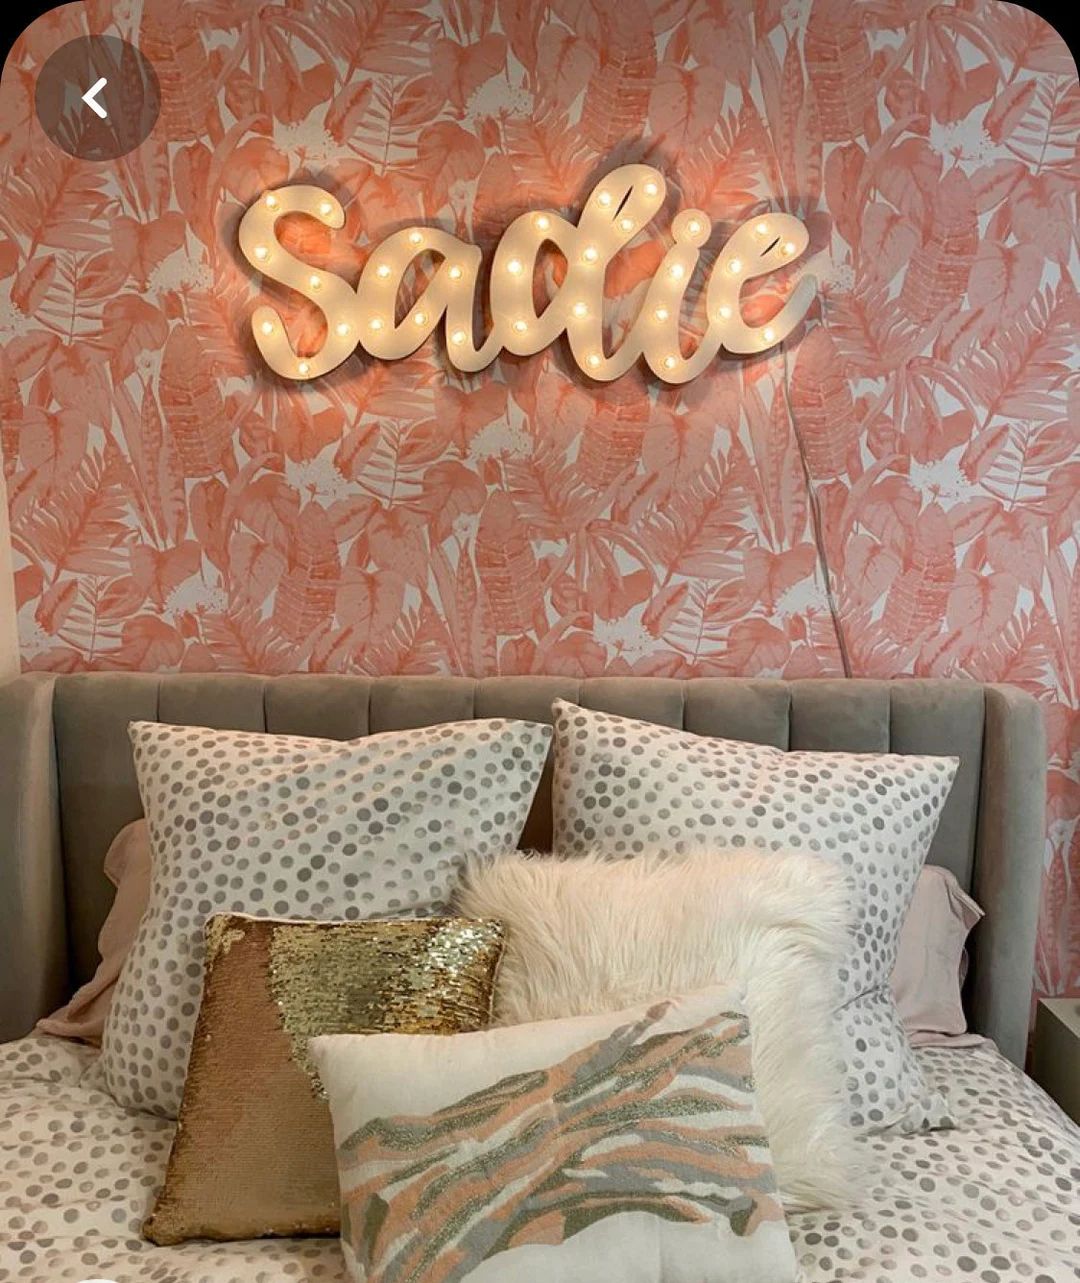 Marquee Sign Light Sign Personalized Wood ... LOVE Play Eat - Etsy | Etsy (US)